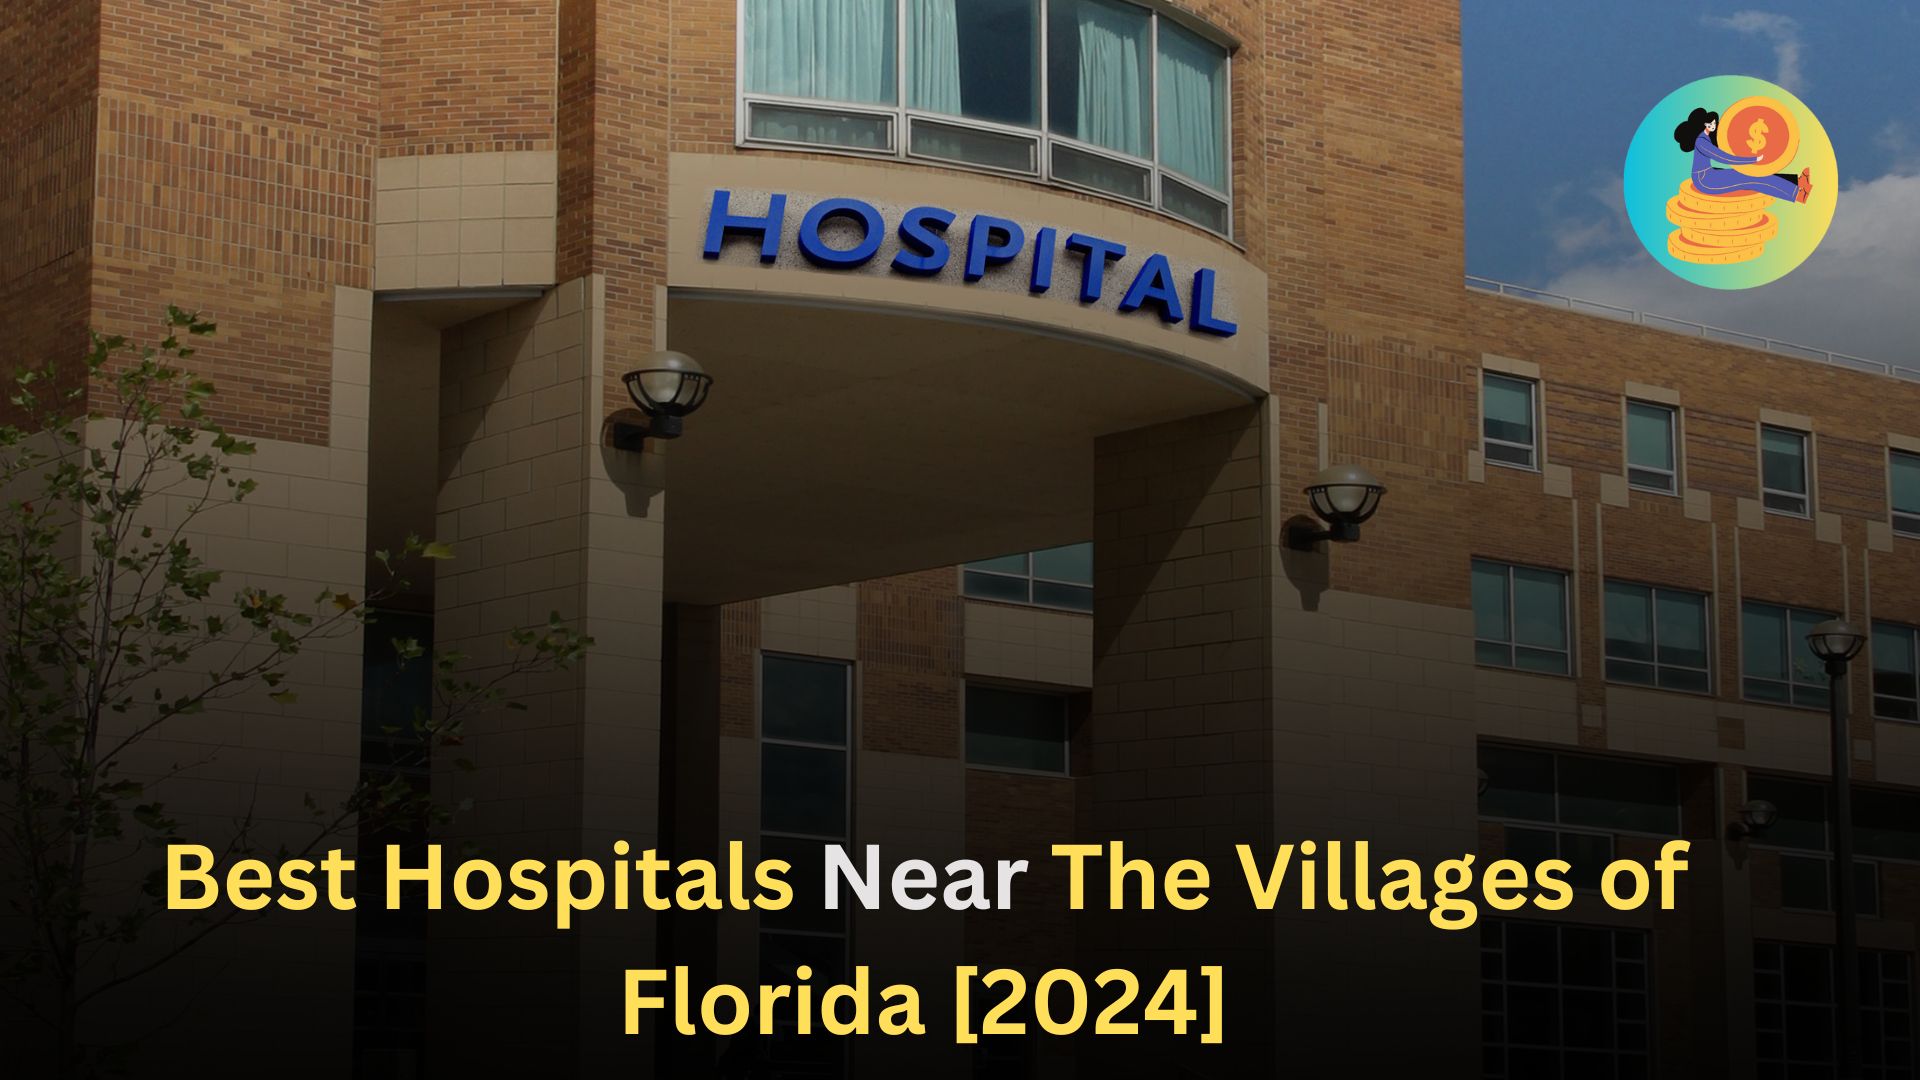 Best Hospitals Near The Villages of Florida [2024]